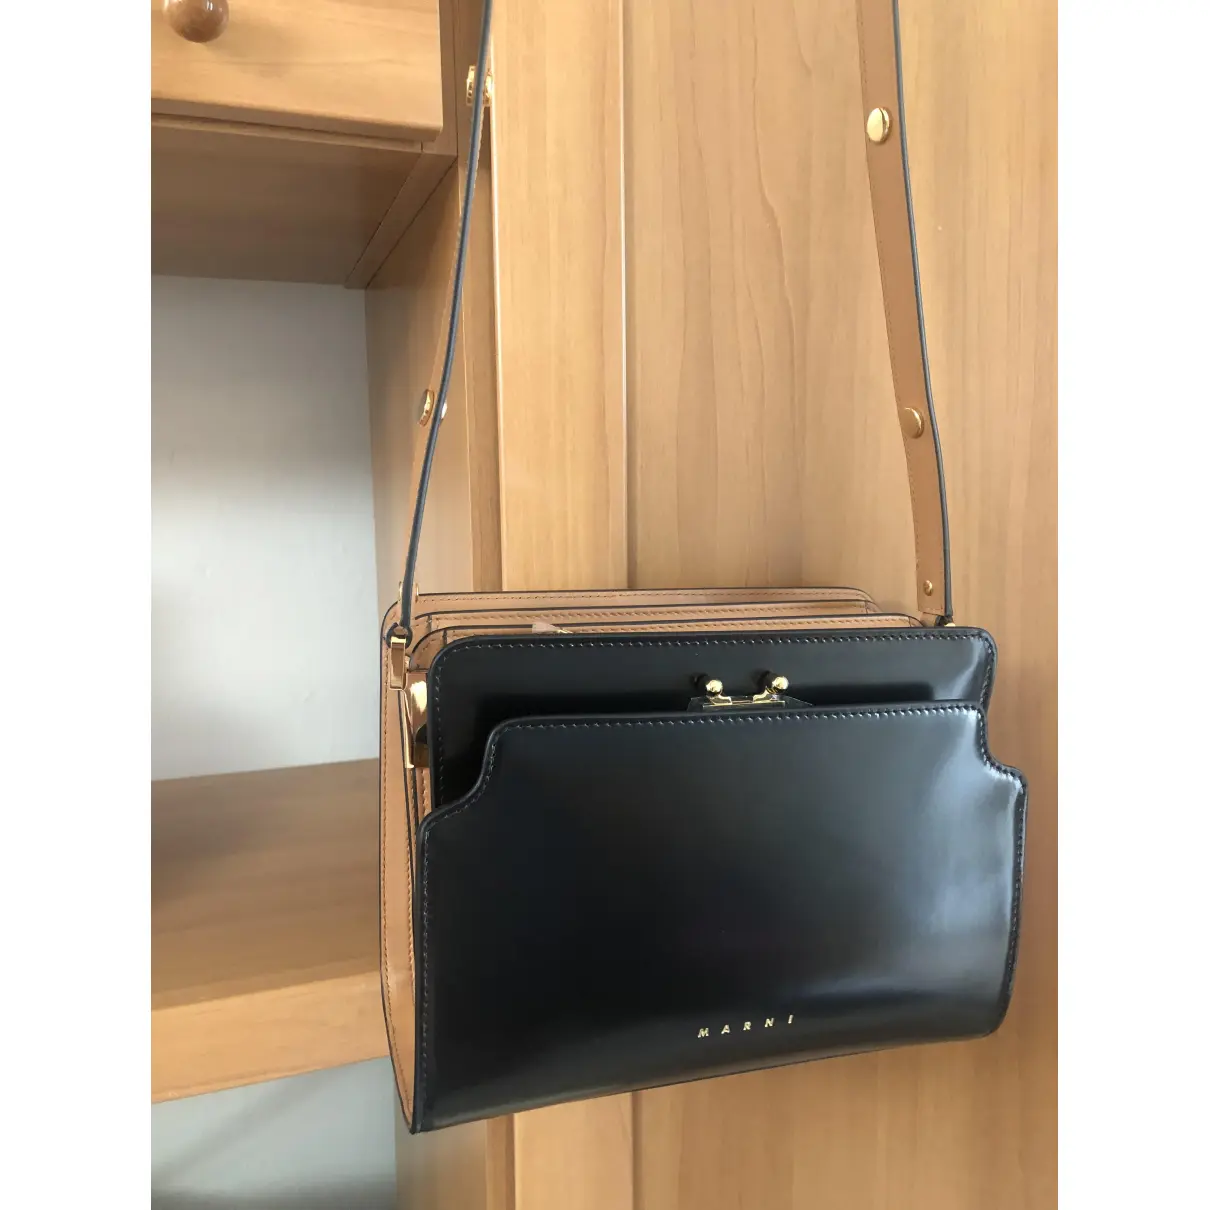 Buy Marni Trunk leather bag online